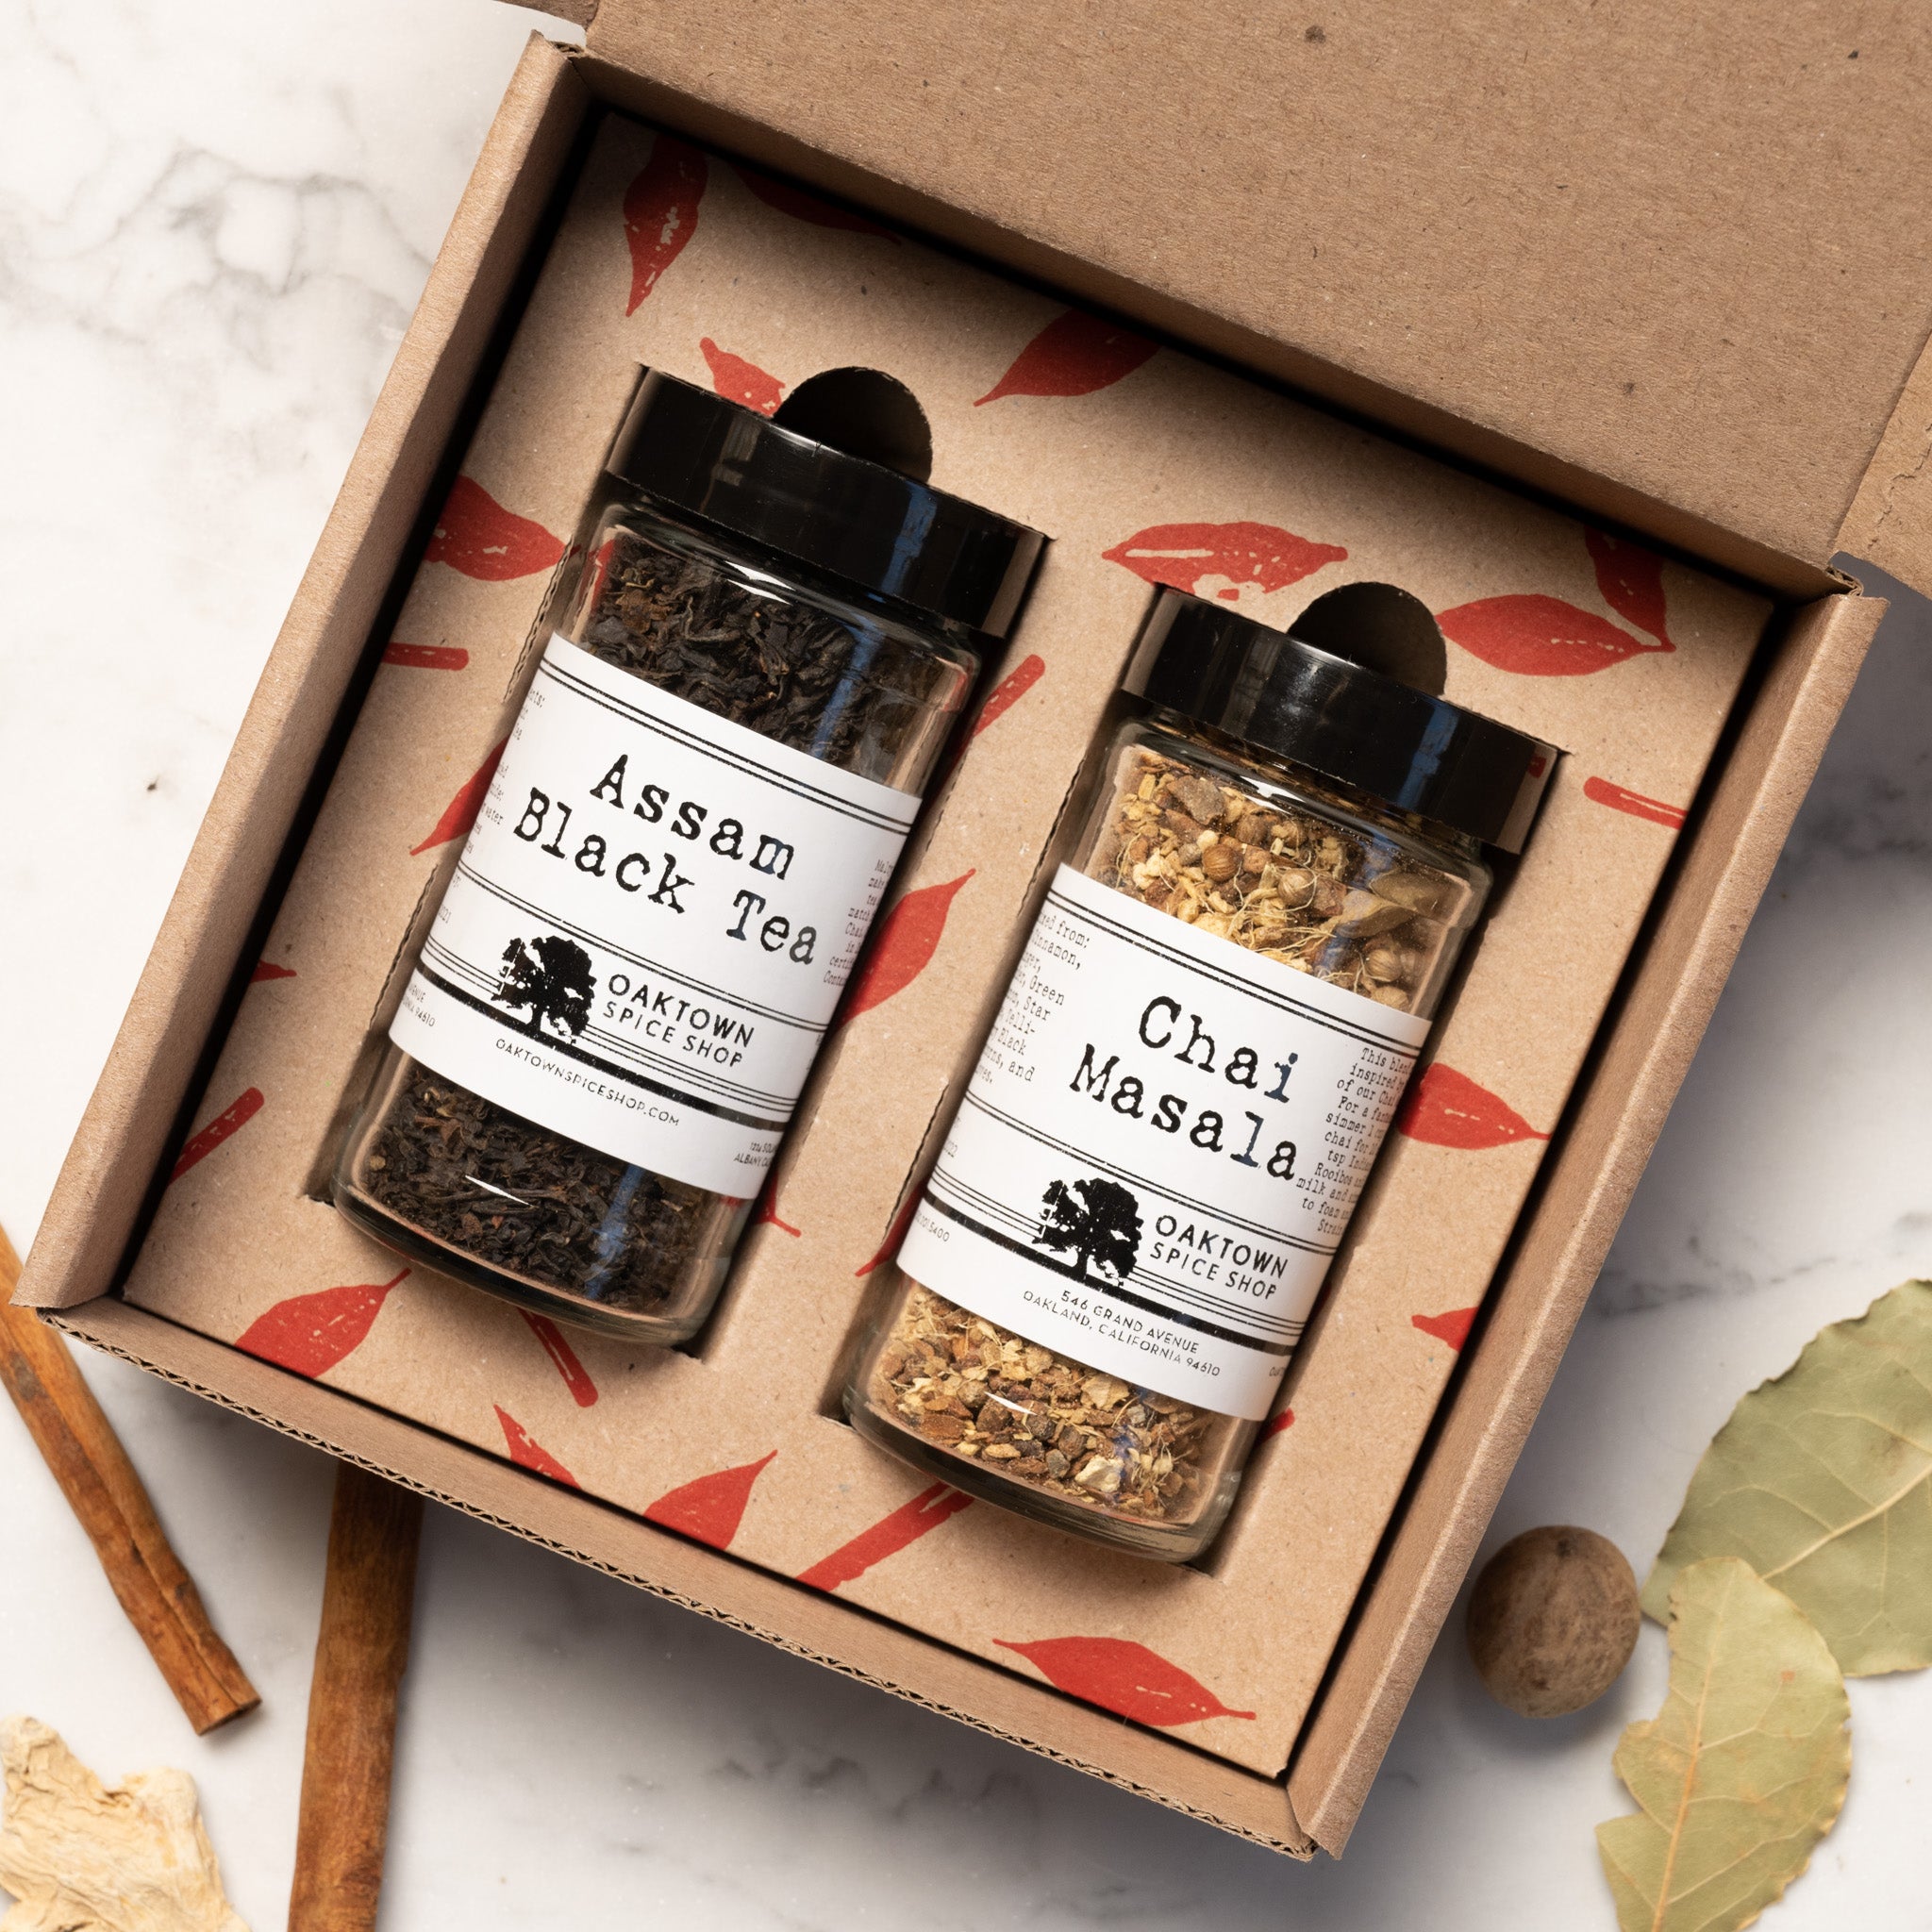 Chai Gift Set Box With jars of Chai Masala and Organic Assam Tea by Oaktown Spice Shop